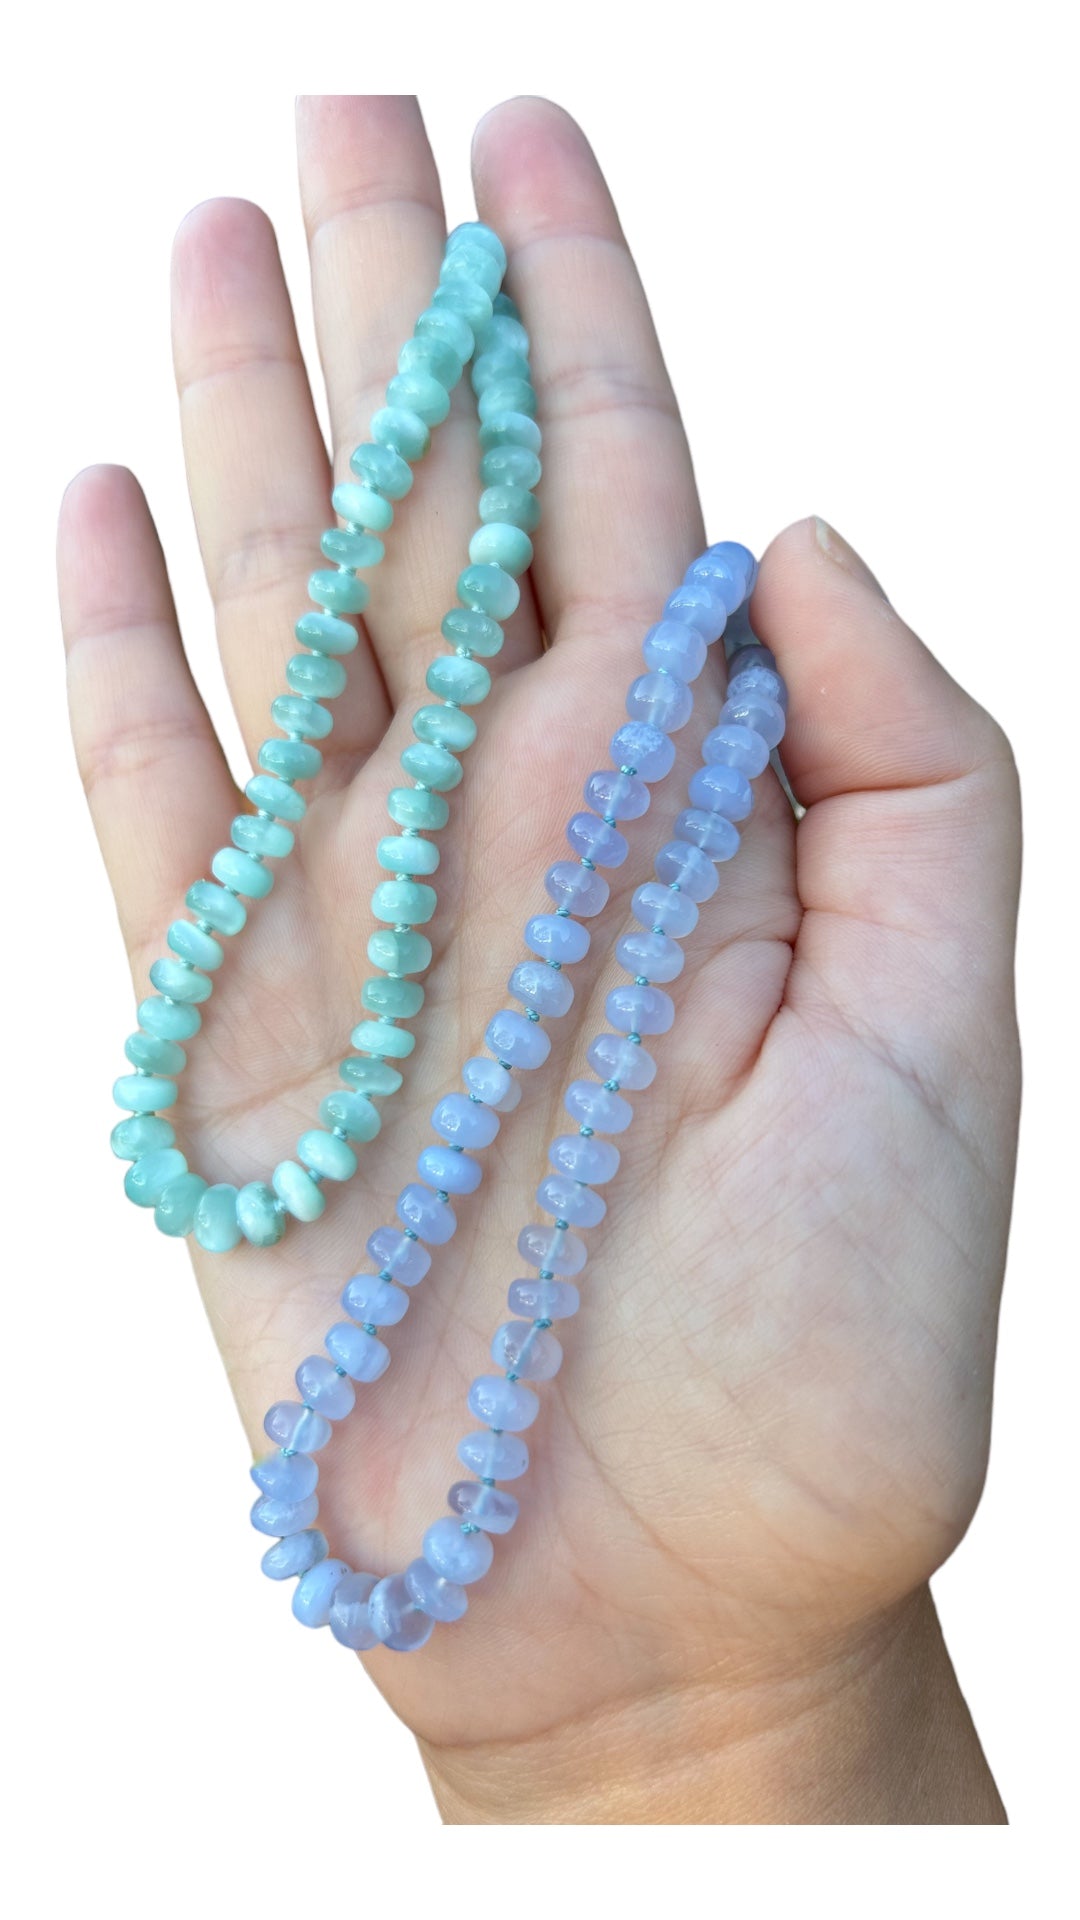 Lavender Chalcedony Beaded Candy Necklace